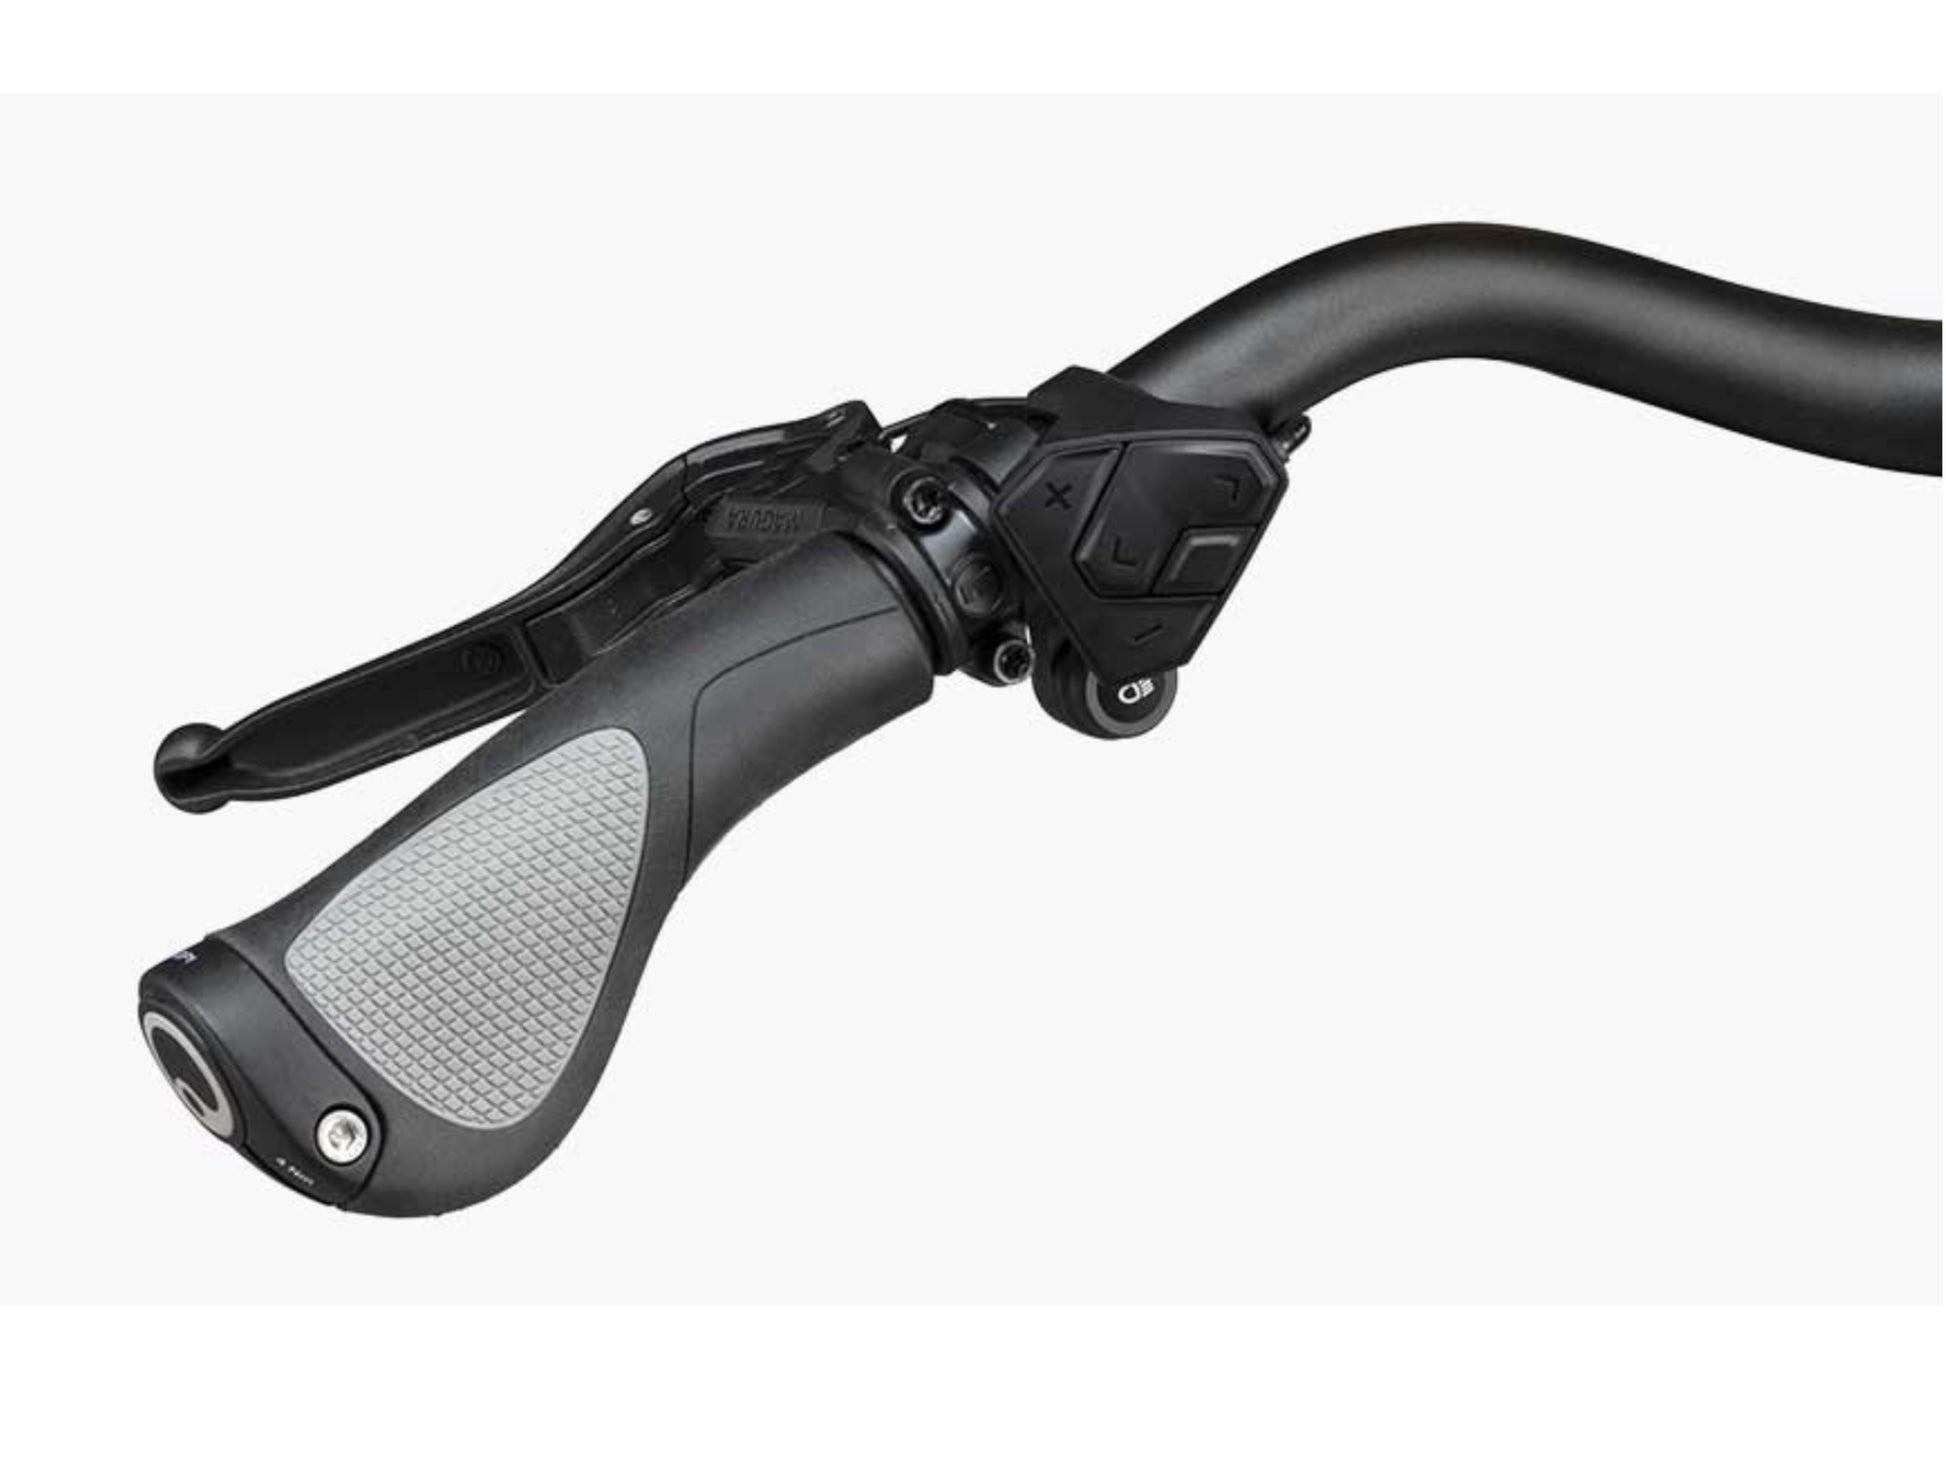 Riese and Muller Supercharger GT Vario emtb hardtail close up comfort kit option